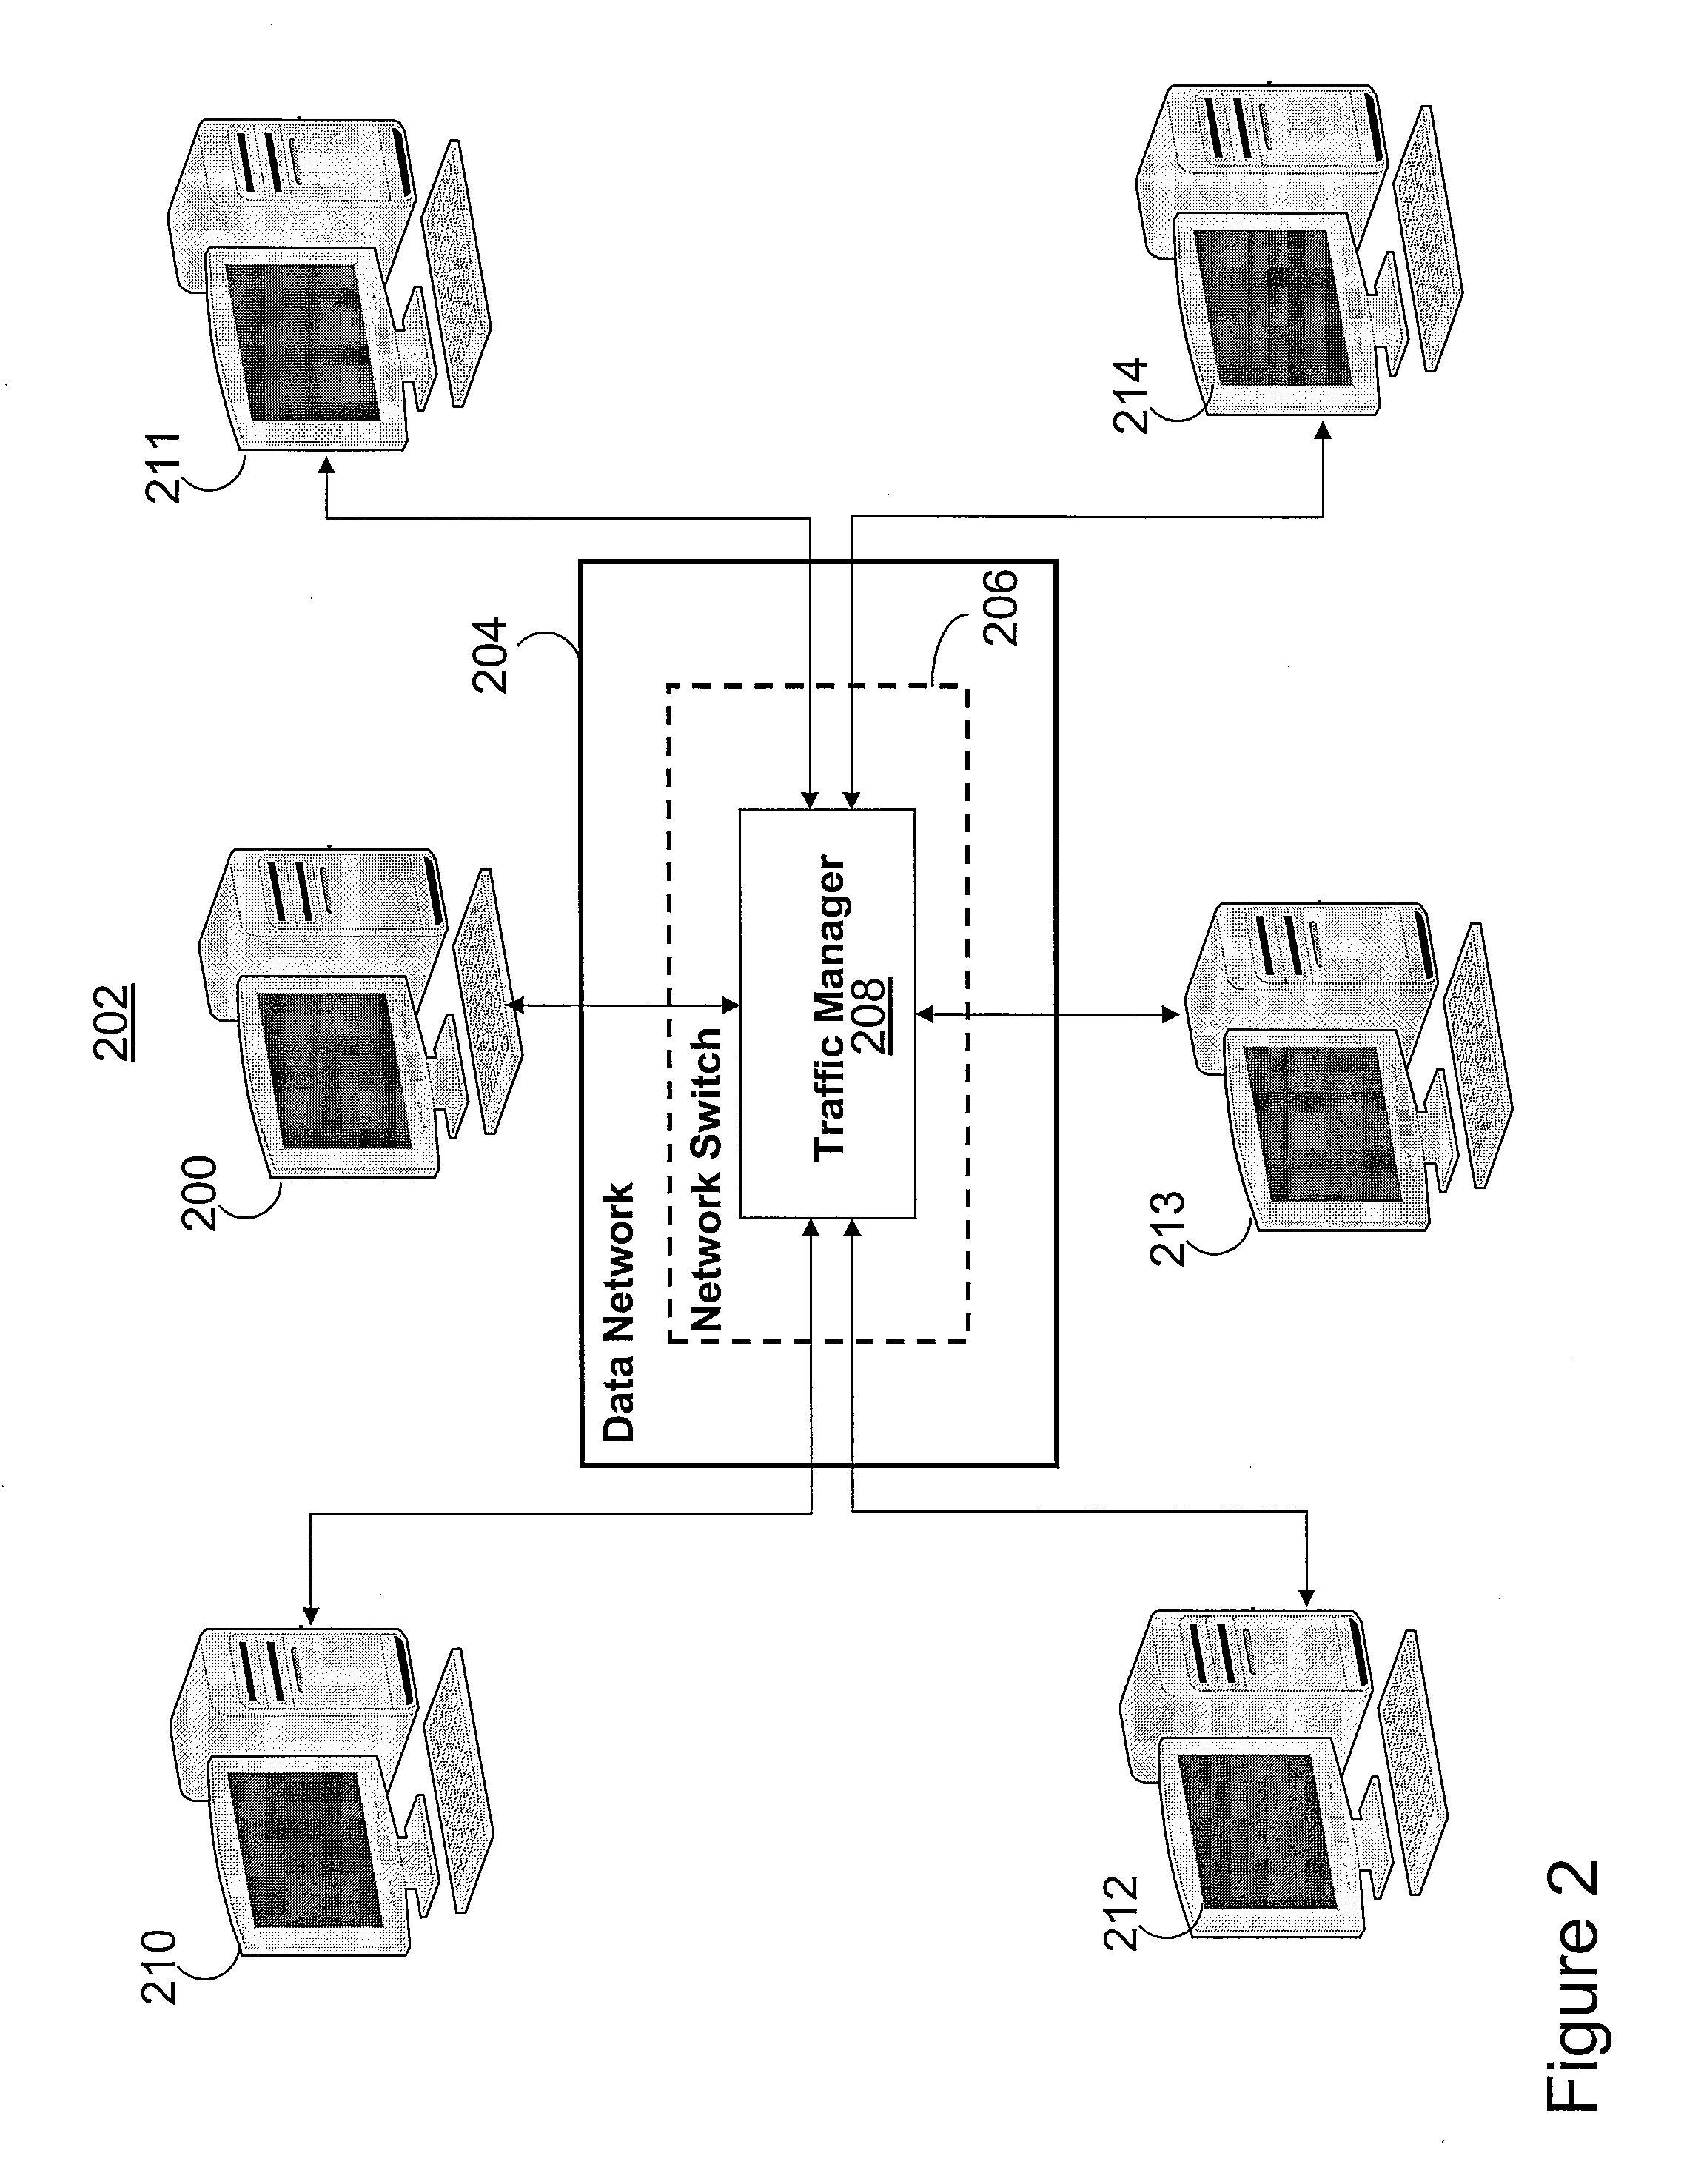 Method for application layer synchronous traffic shaping